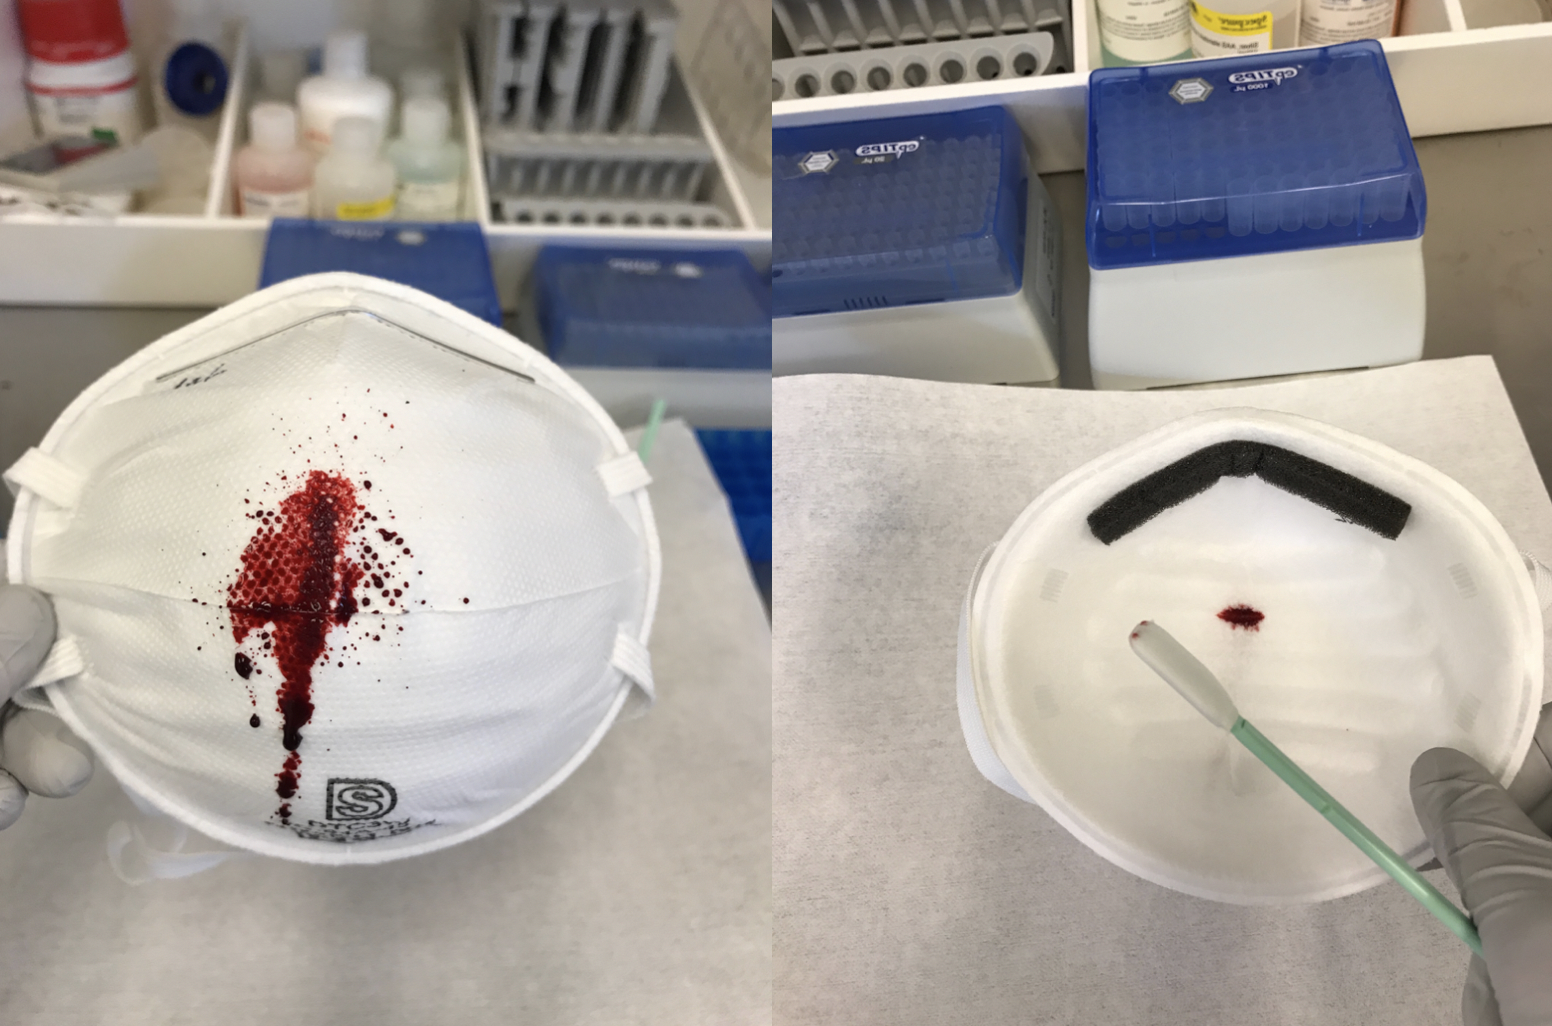 The photo on the right shows red, synthetic blood spatter on the front of a face mask. The photo on the left shows the backside of the mask, where the blood has soaked through. 